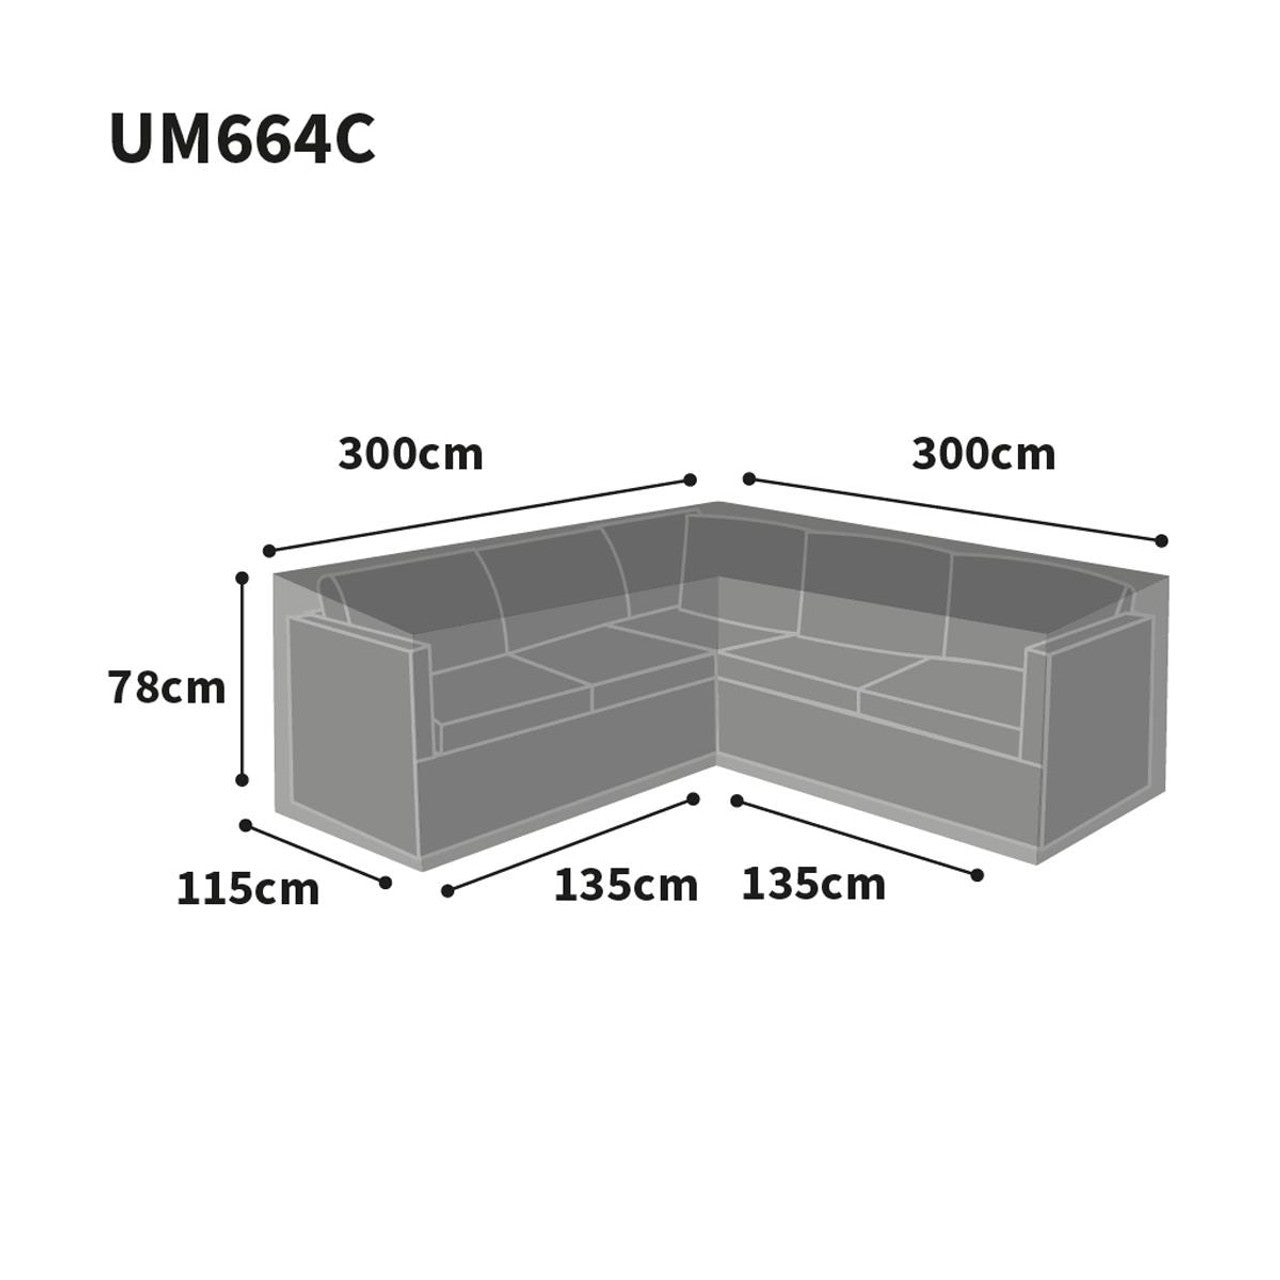 Bosmere Ultimate Protector Outdoor Furniture Cover For L Shaped Sofa 300cm x 300cm